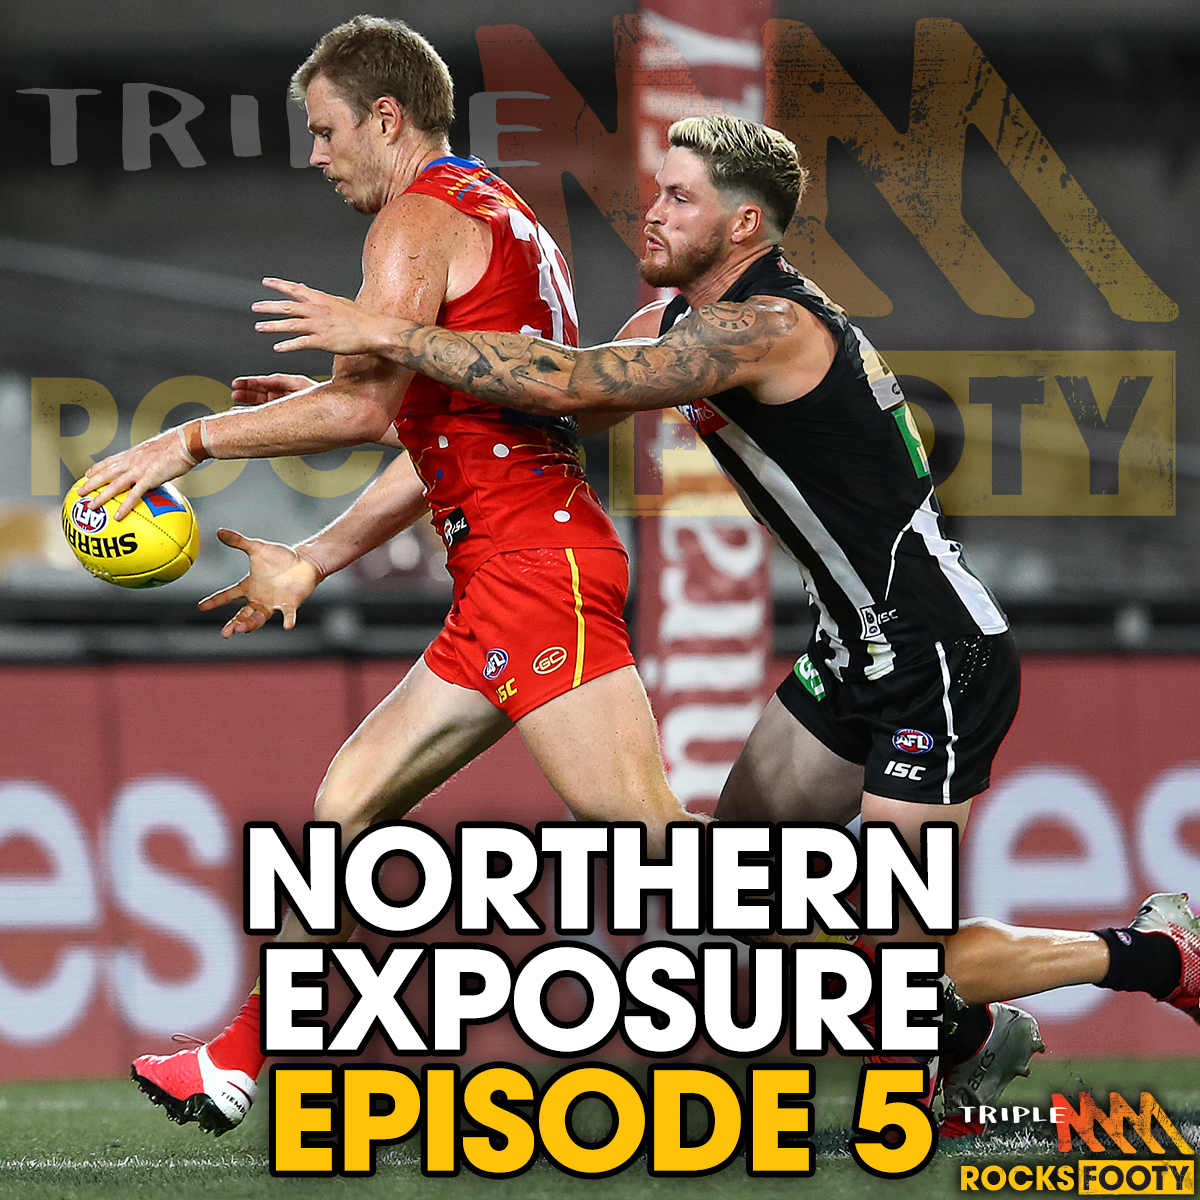 Northern Exposure Episode 5 - Metricon's pool, the most underrated player in the AFL, a radical proposal for the last round of the season and are the Suns the Lions of 2018?